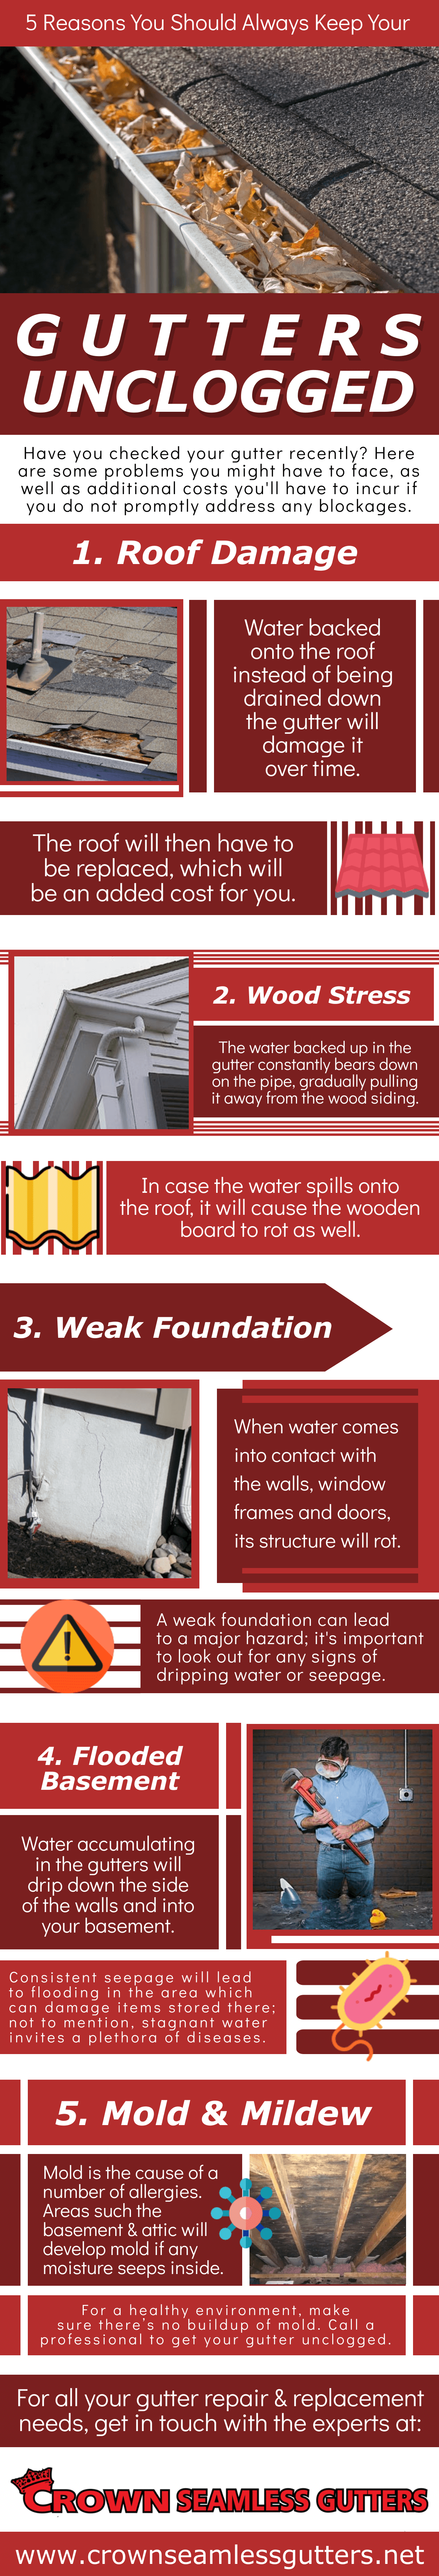 Damages Caused by Gutter Blockages